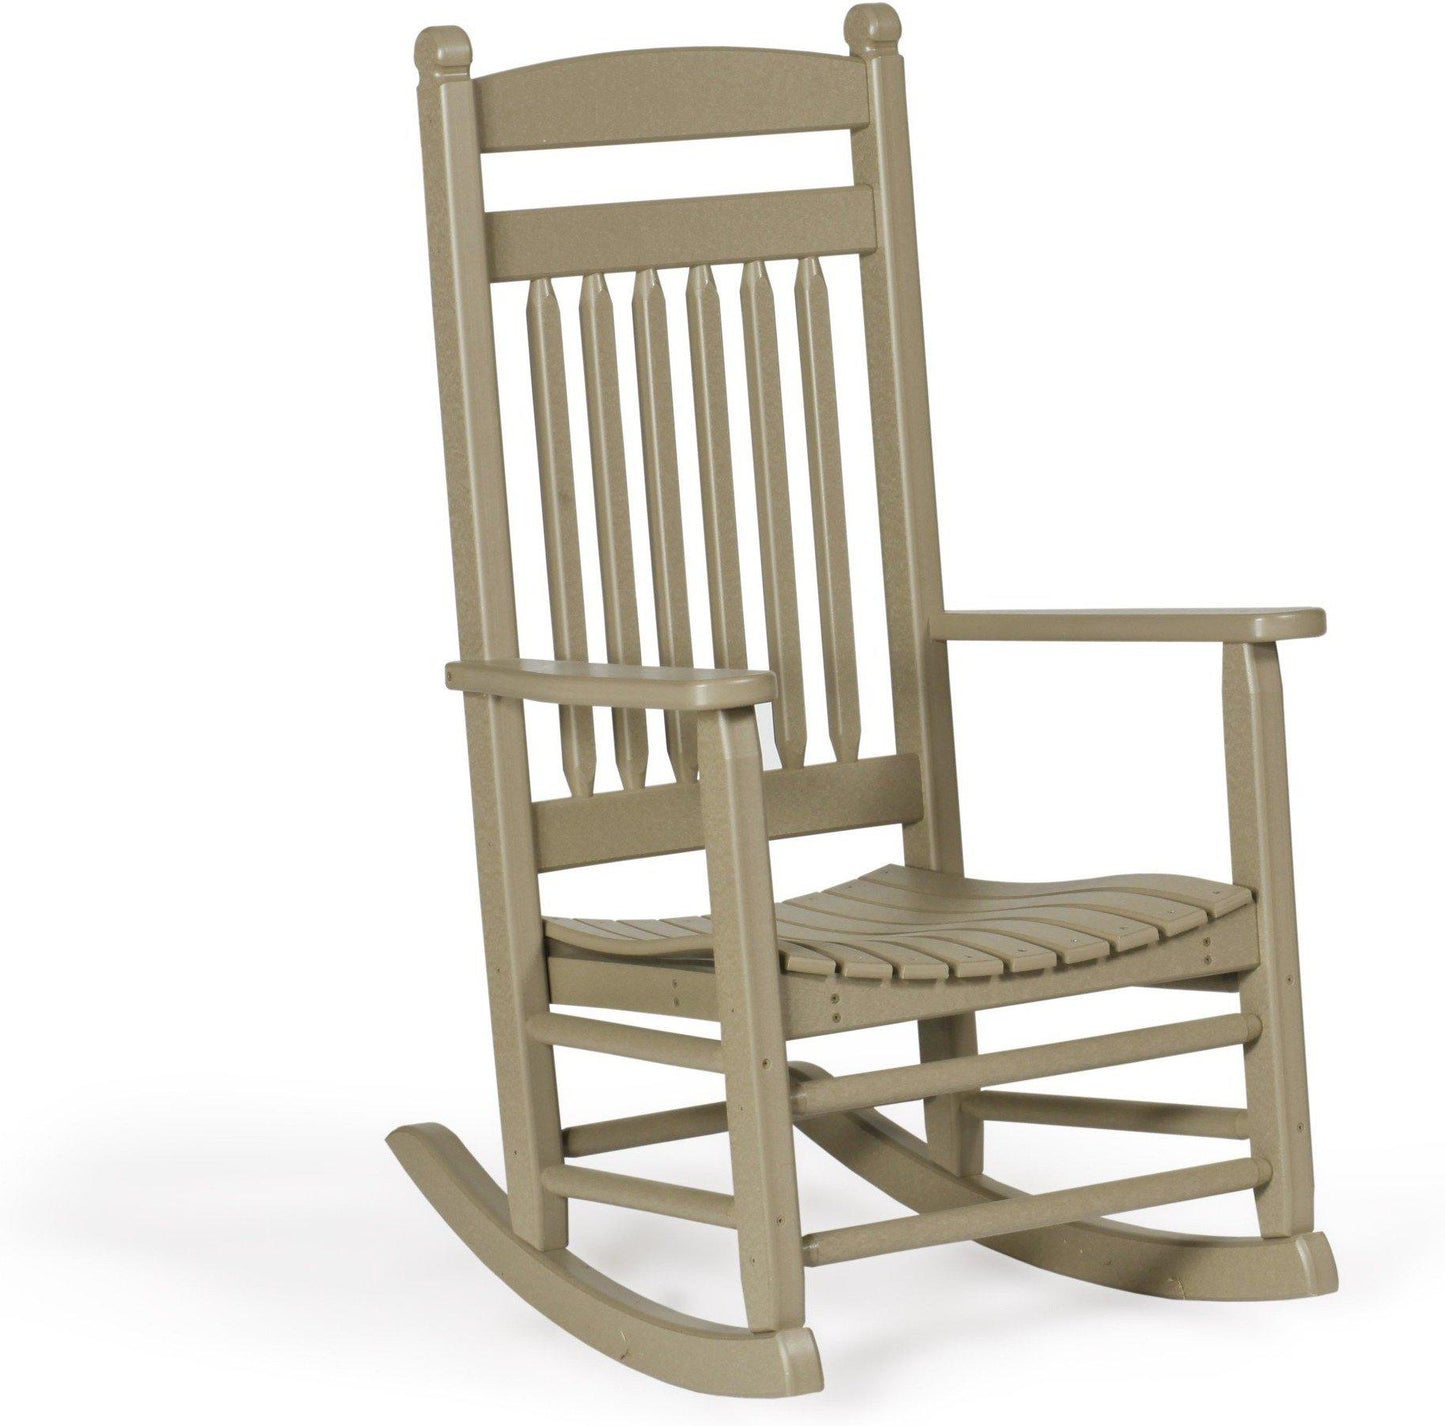 Leisure Lawns Amish Made Recycled Plastic Lumbar Rocking Chair Model #84 - LEAD TIME TO SHIP 6 WEEKS OR LESS